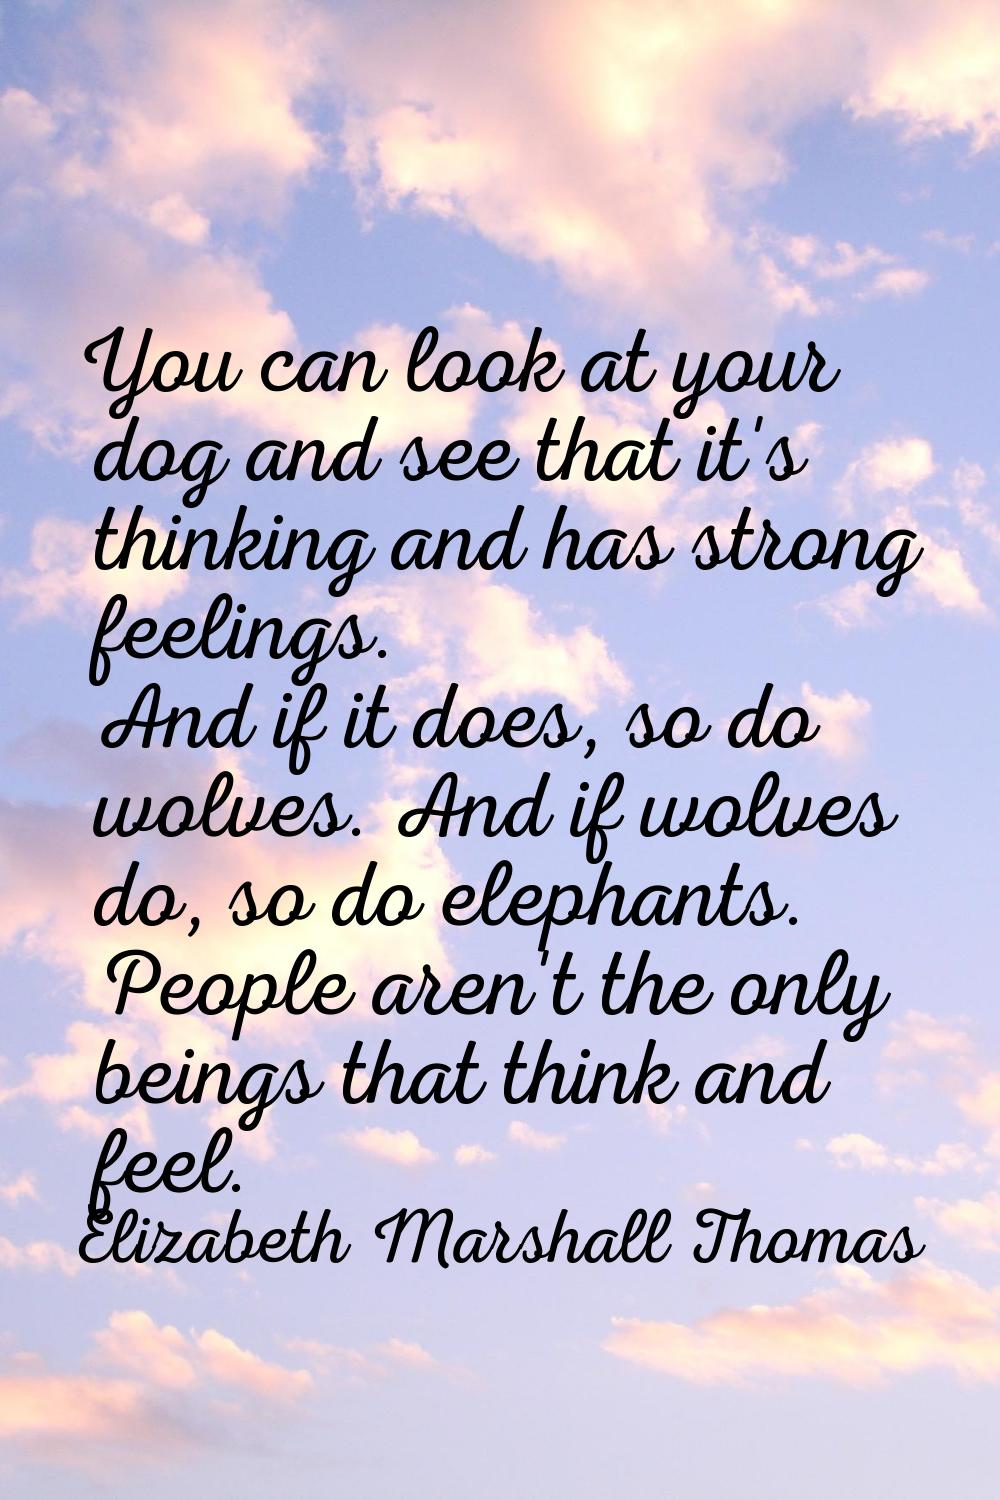 You can look at your dog and see that it's thinking and has strong feelings. And if it does, so do 